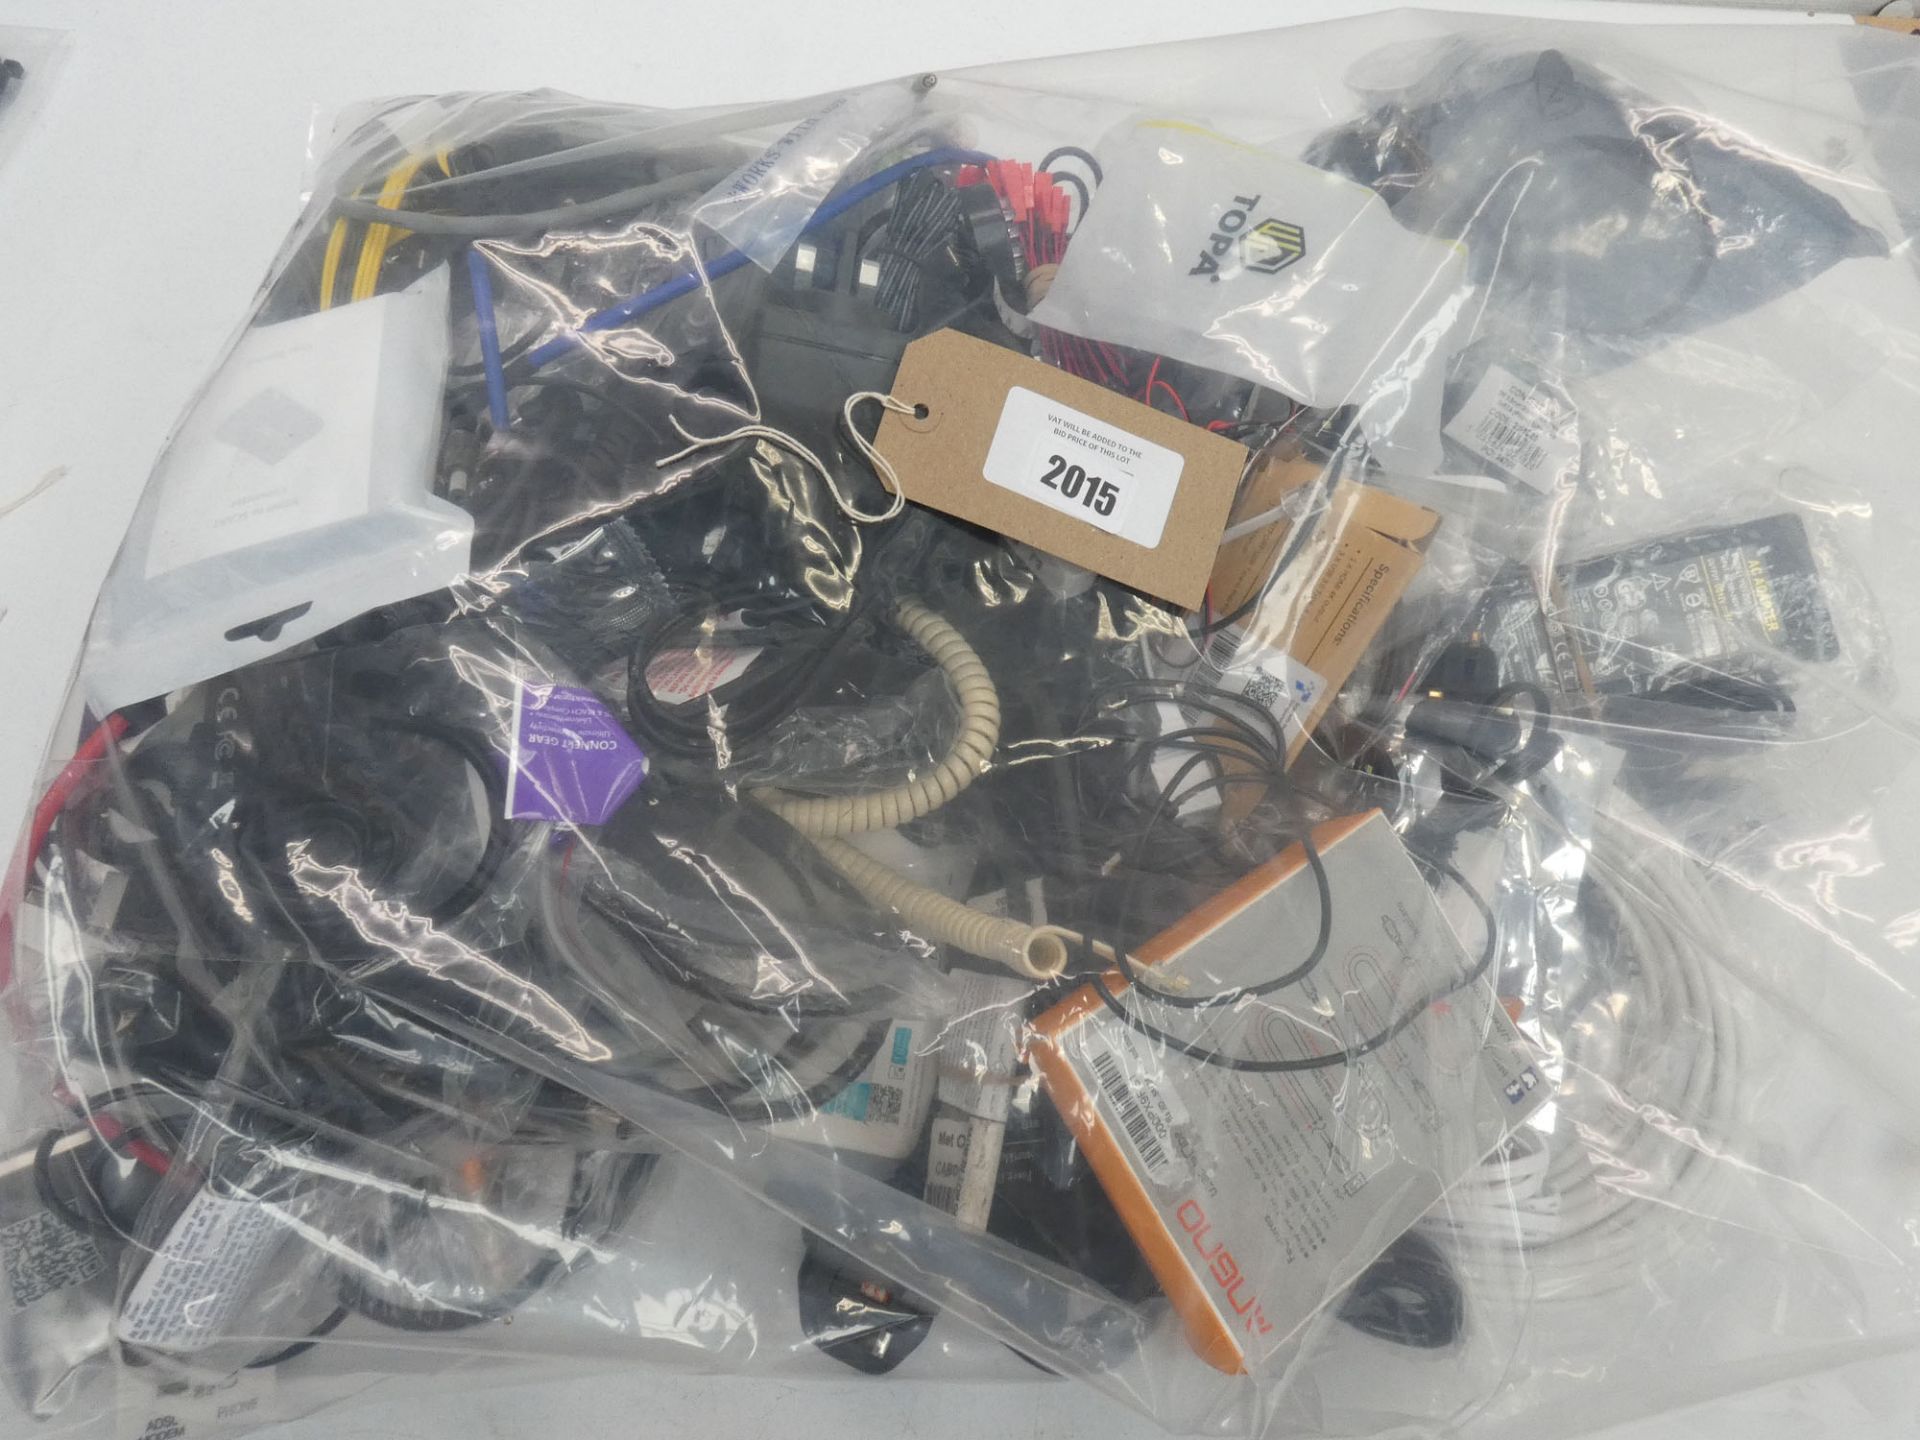 Bag containing leads, cables and PSUs